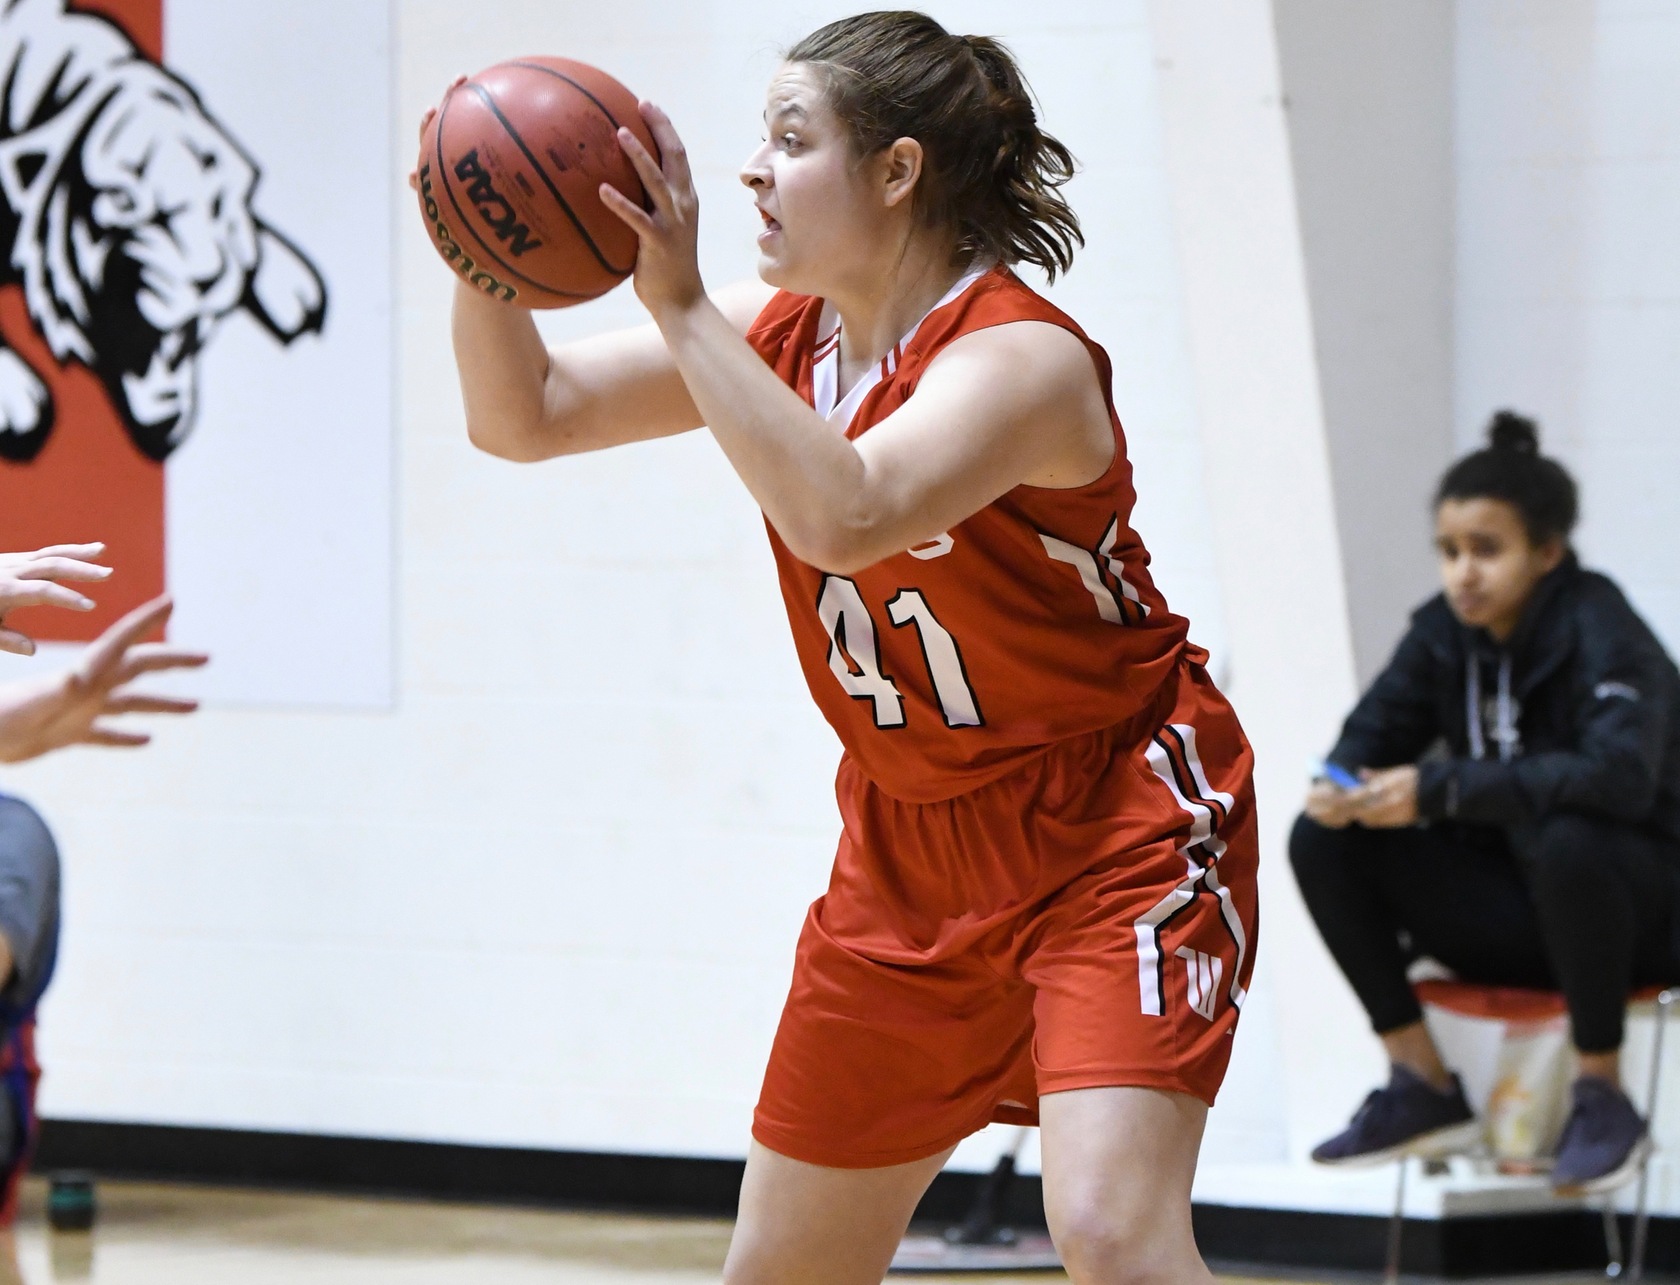 Senior post Abigail Crum scored 13 points and pulled down seven rebounds in the 87-49 road win at Wooster.